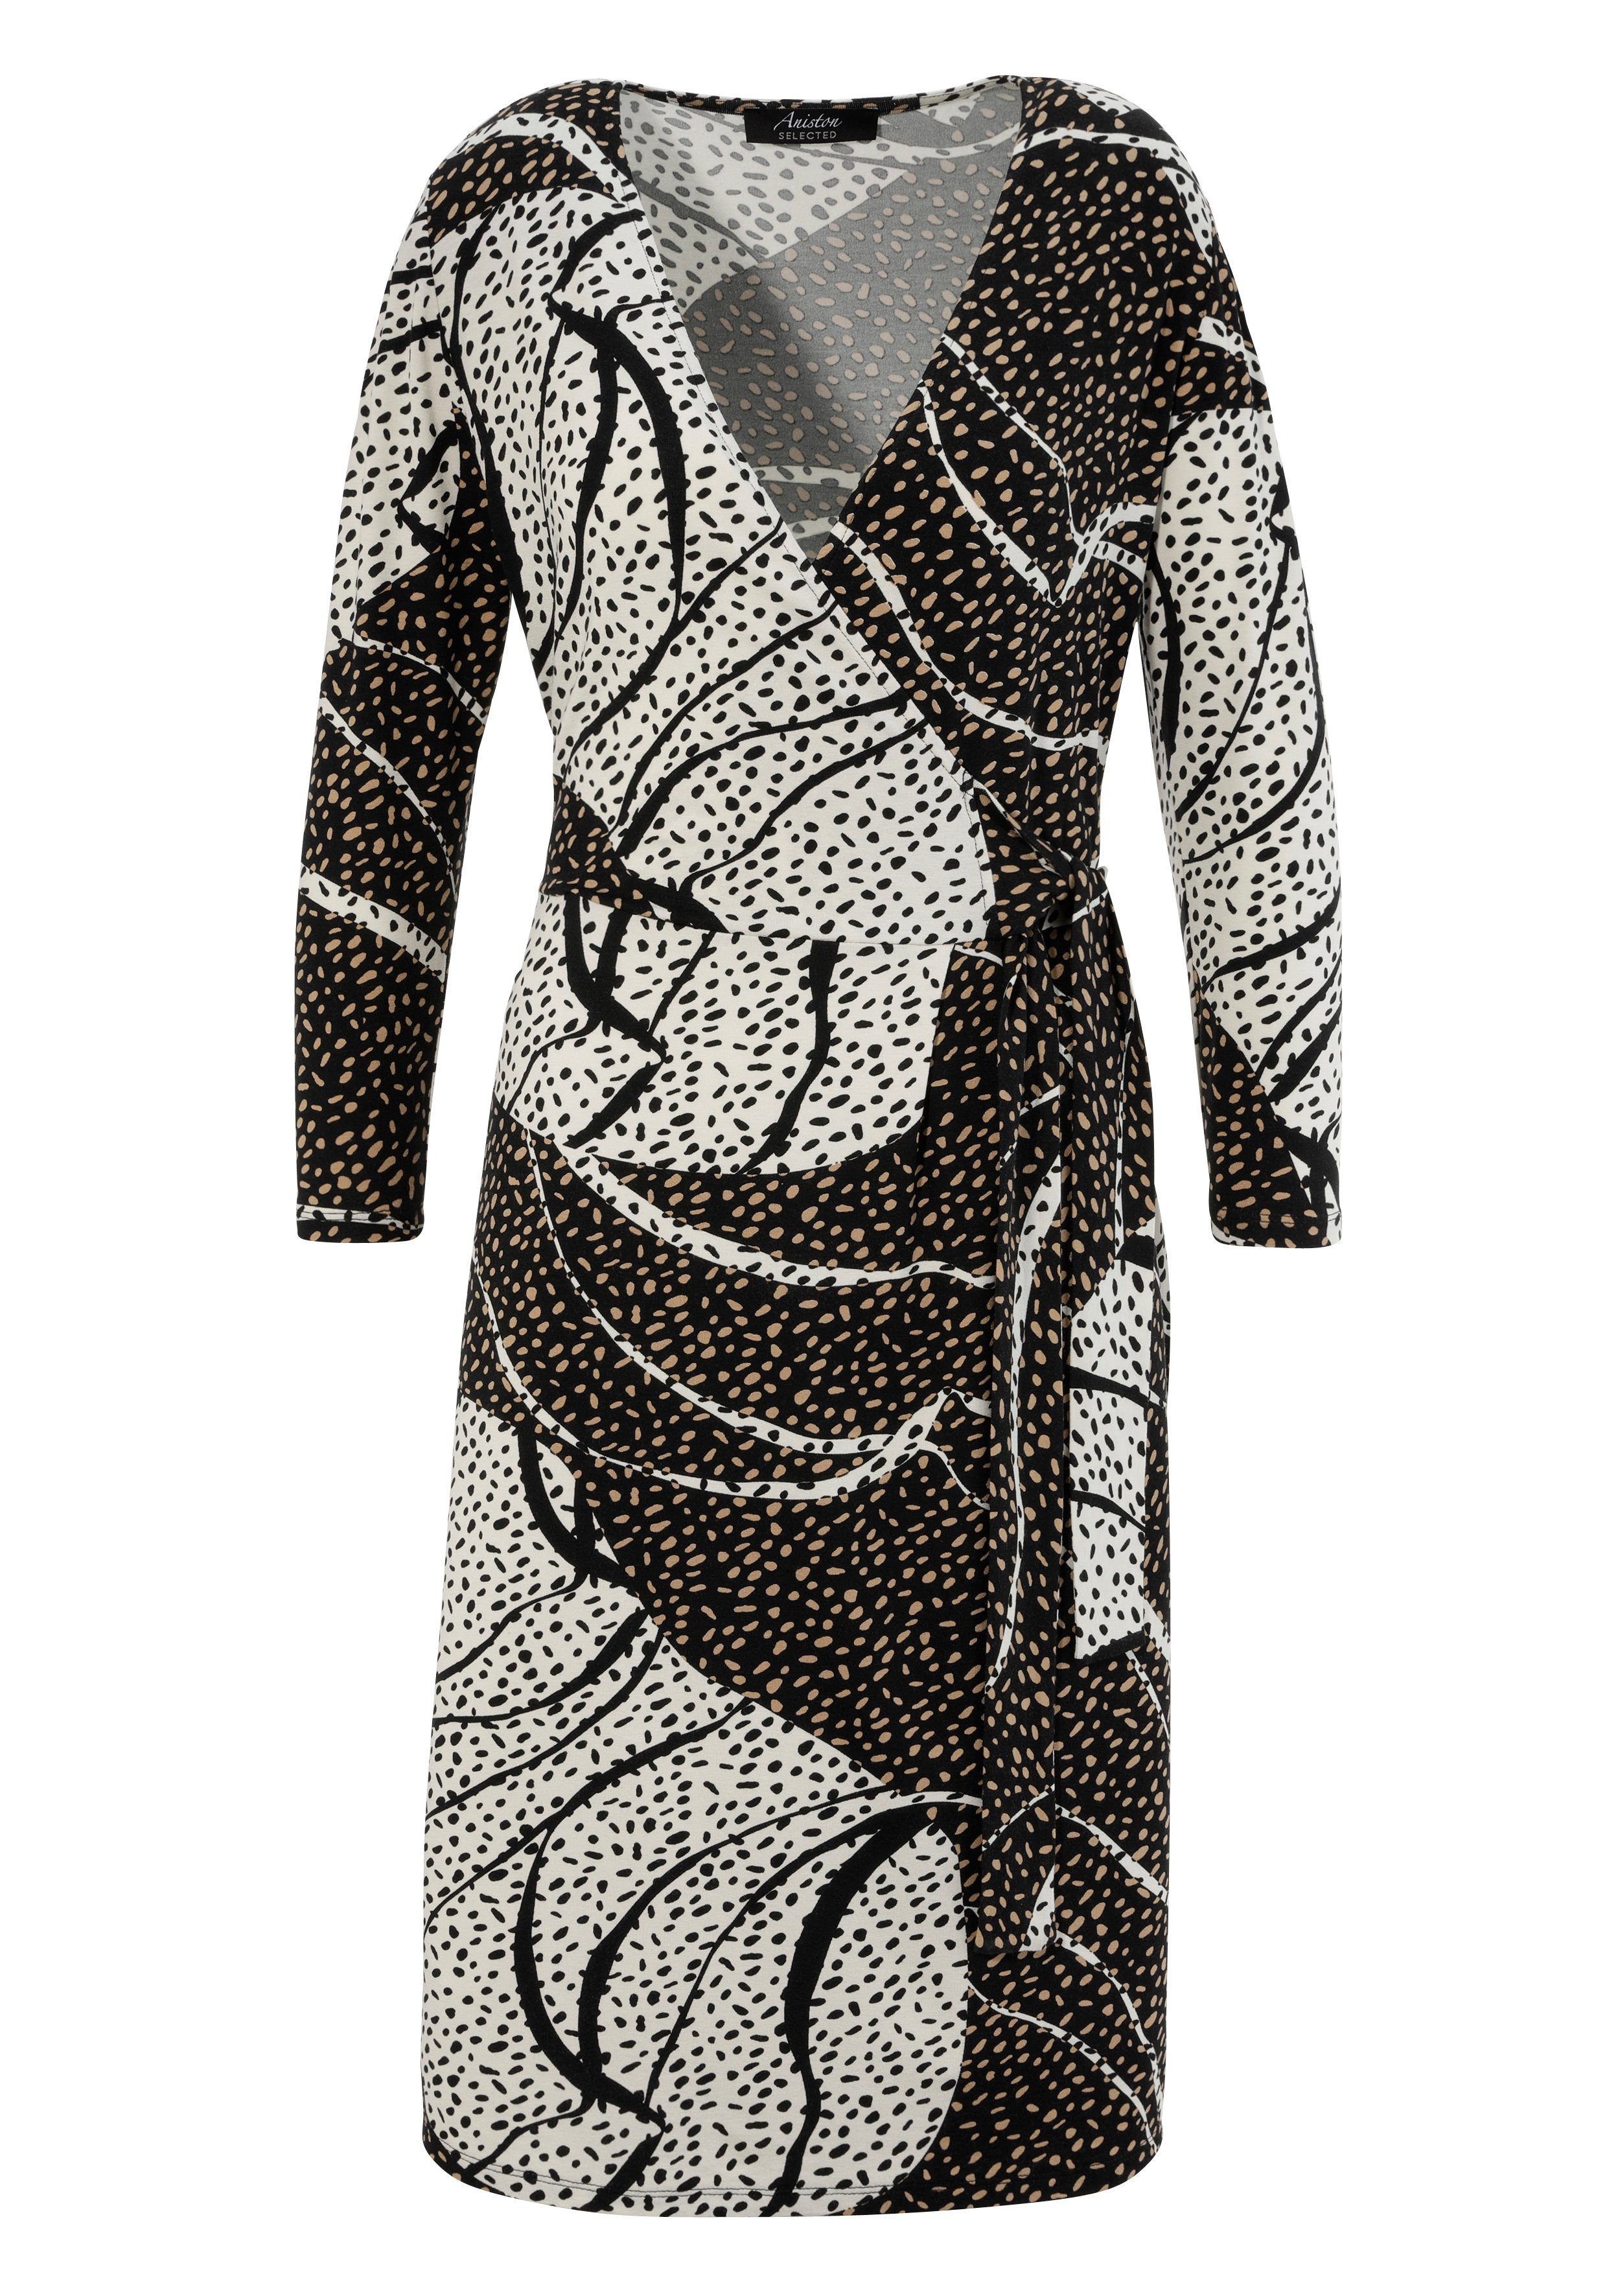 mit SELECTED Allover-Muster Jerseykleid Aniston trendy